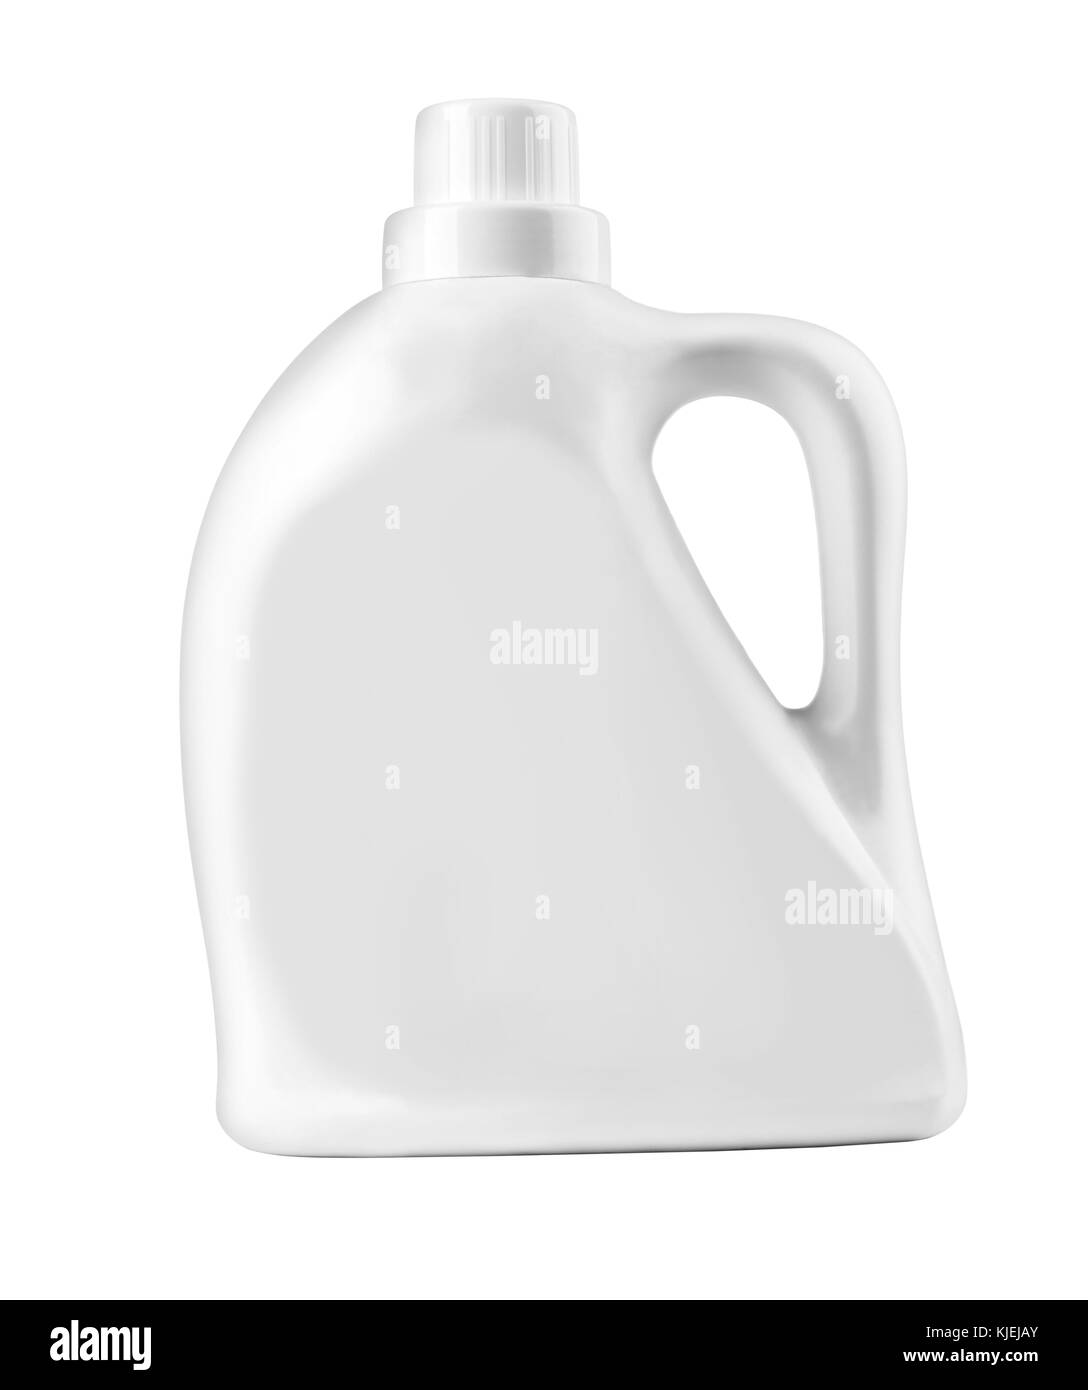 White plastic bottle for liquid laundry detergent, cleaning agent, bleach or fabric softener.with clipping path Stock Photo